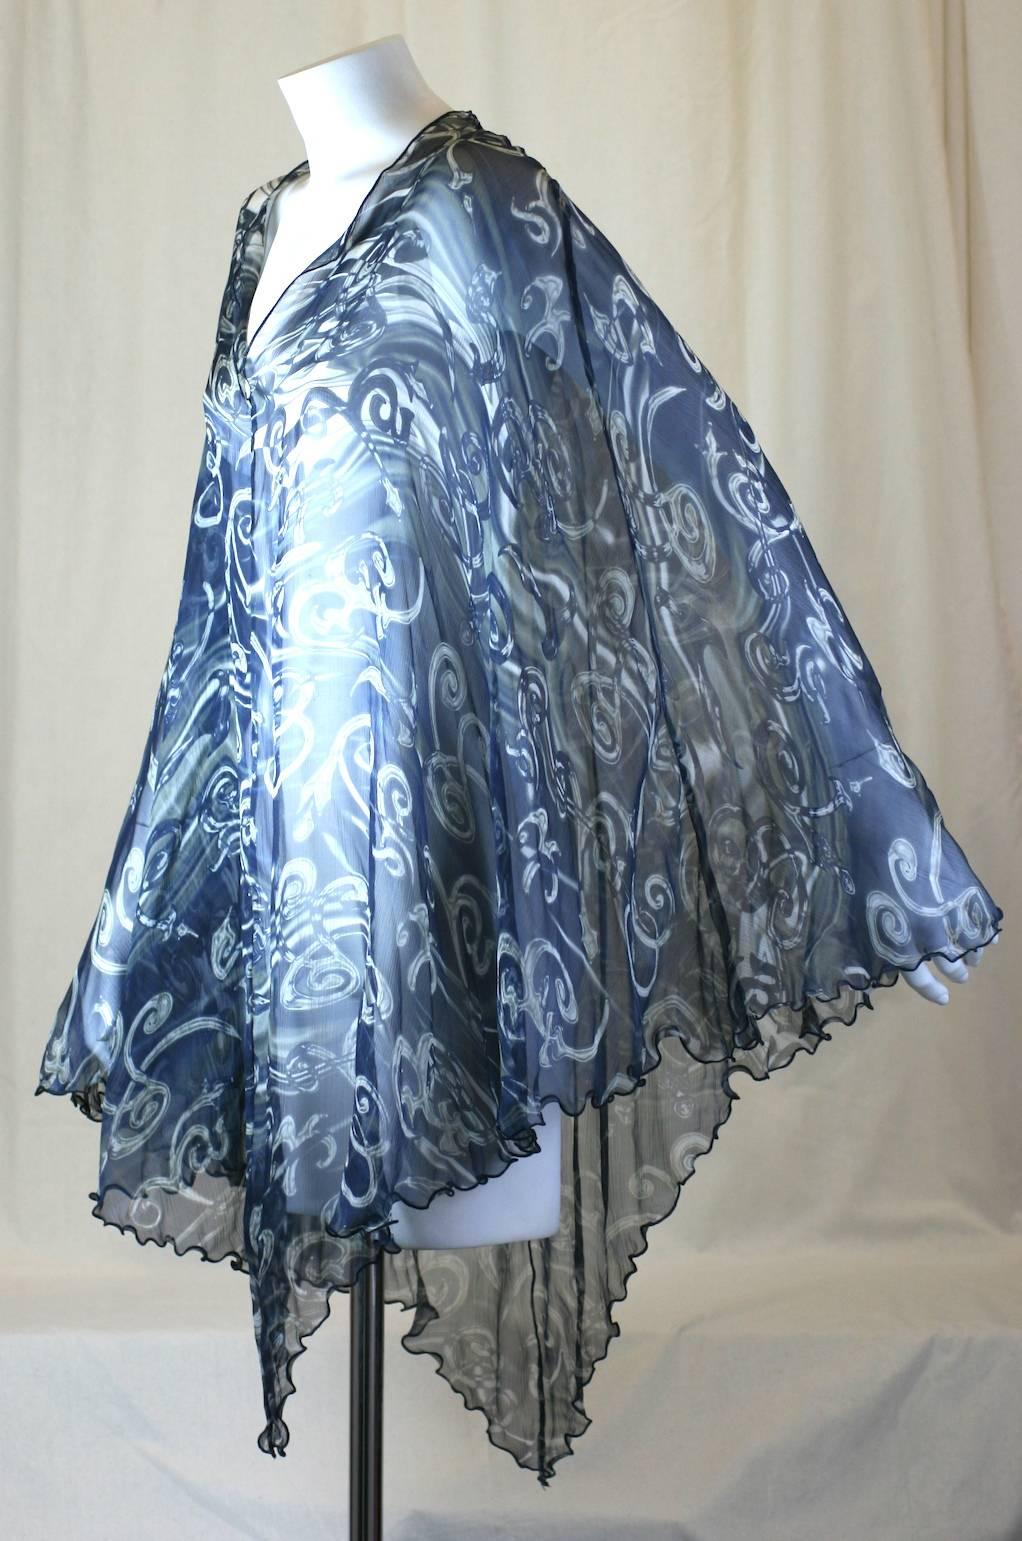 Salvatore  Ferragamo printed silk chiffon poncho. Printed swirling motifs in shades of white and gray on a navy background. Excellent Condition.
Length 36